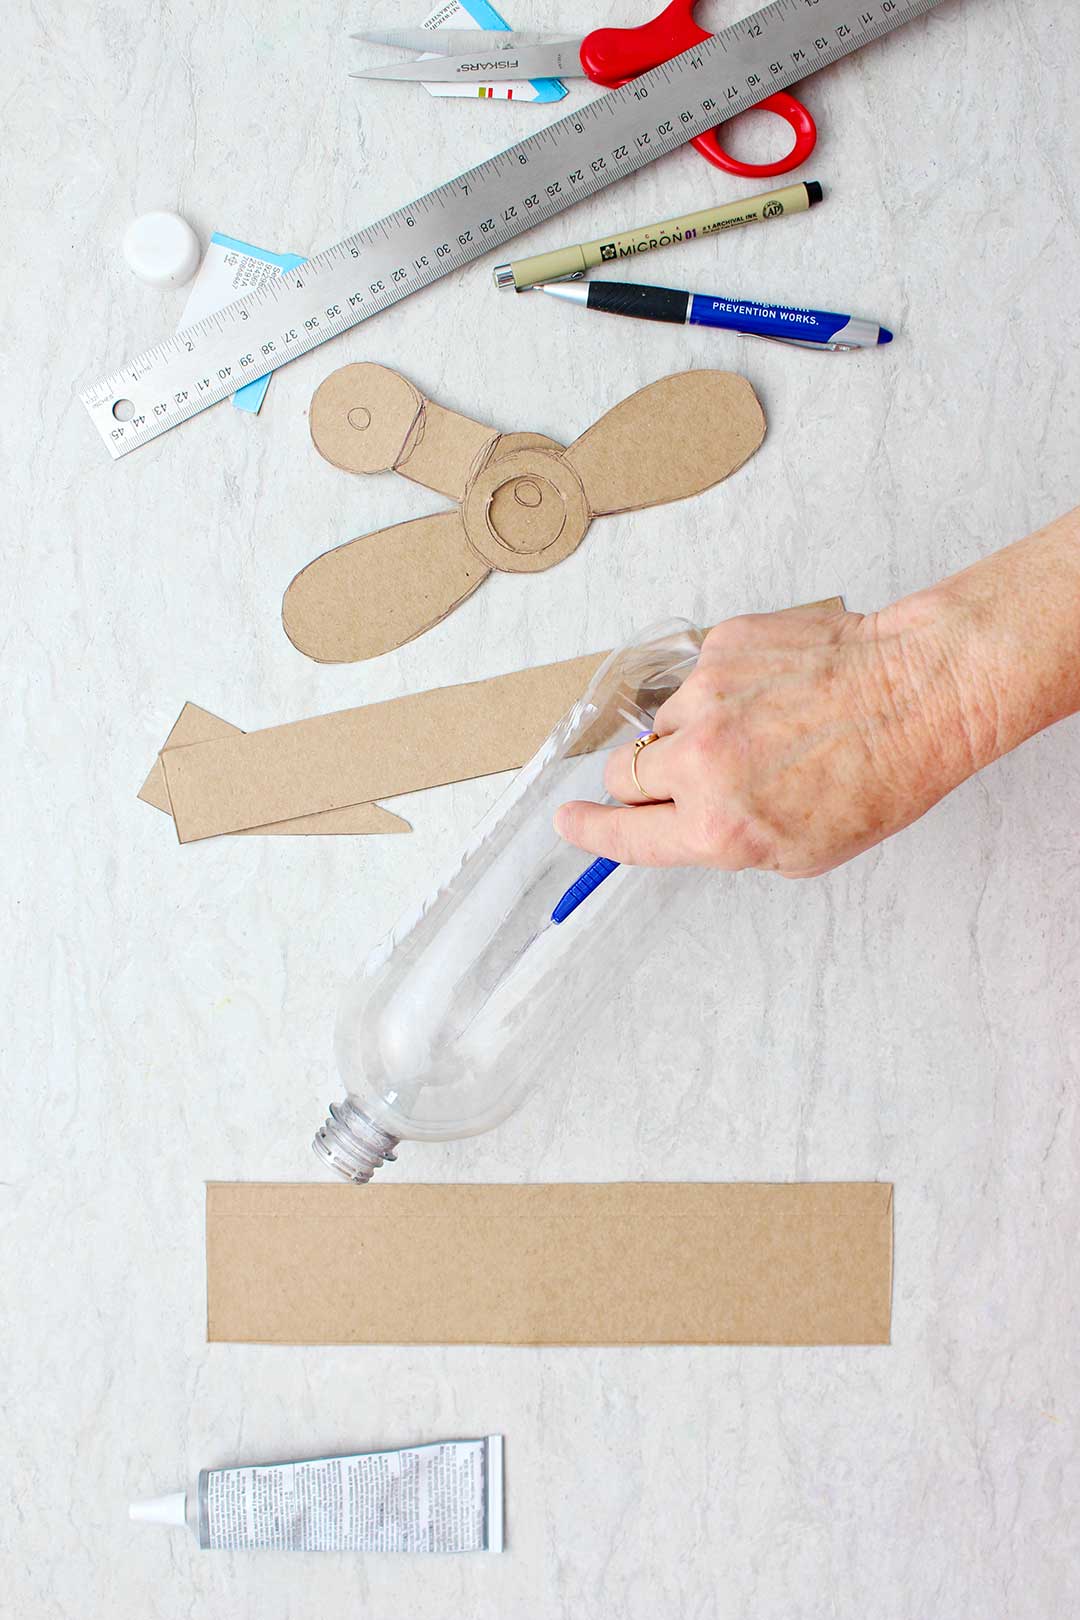 Hand using box cutter to slice a line through the empty plastic bottle with card board wings and propellars near by.